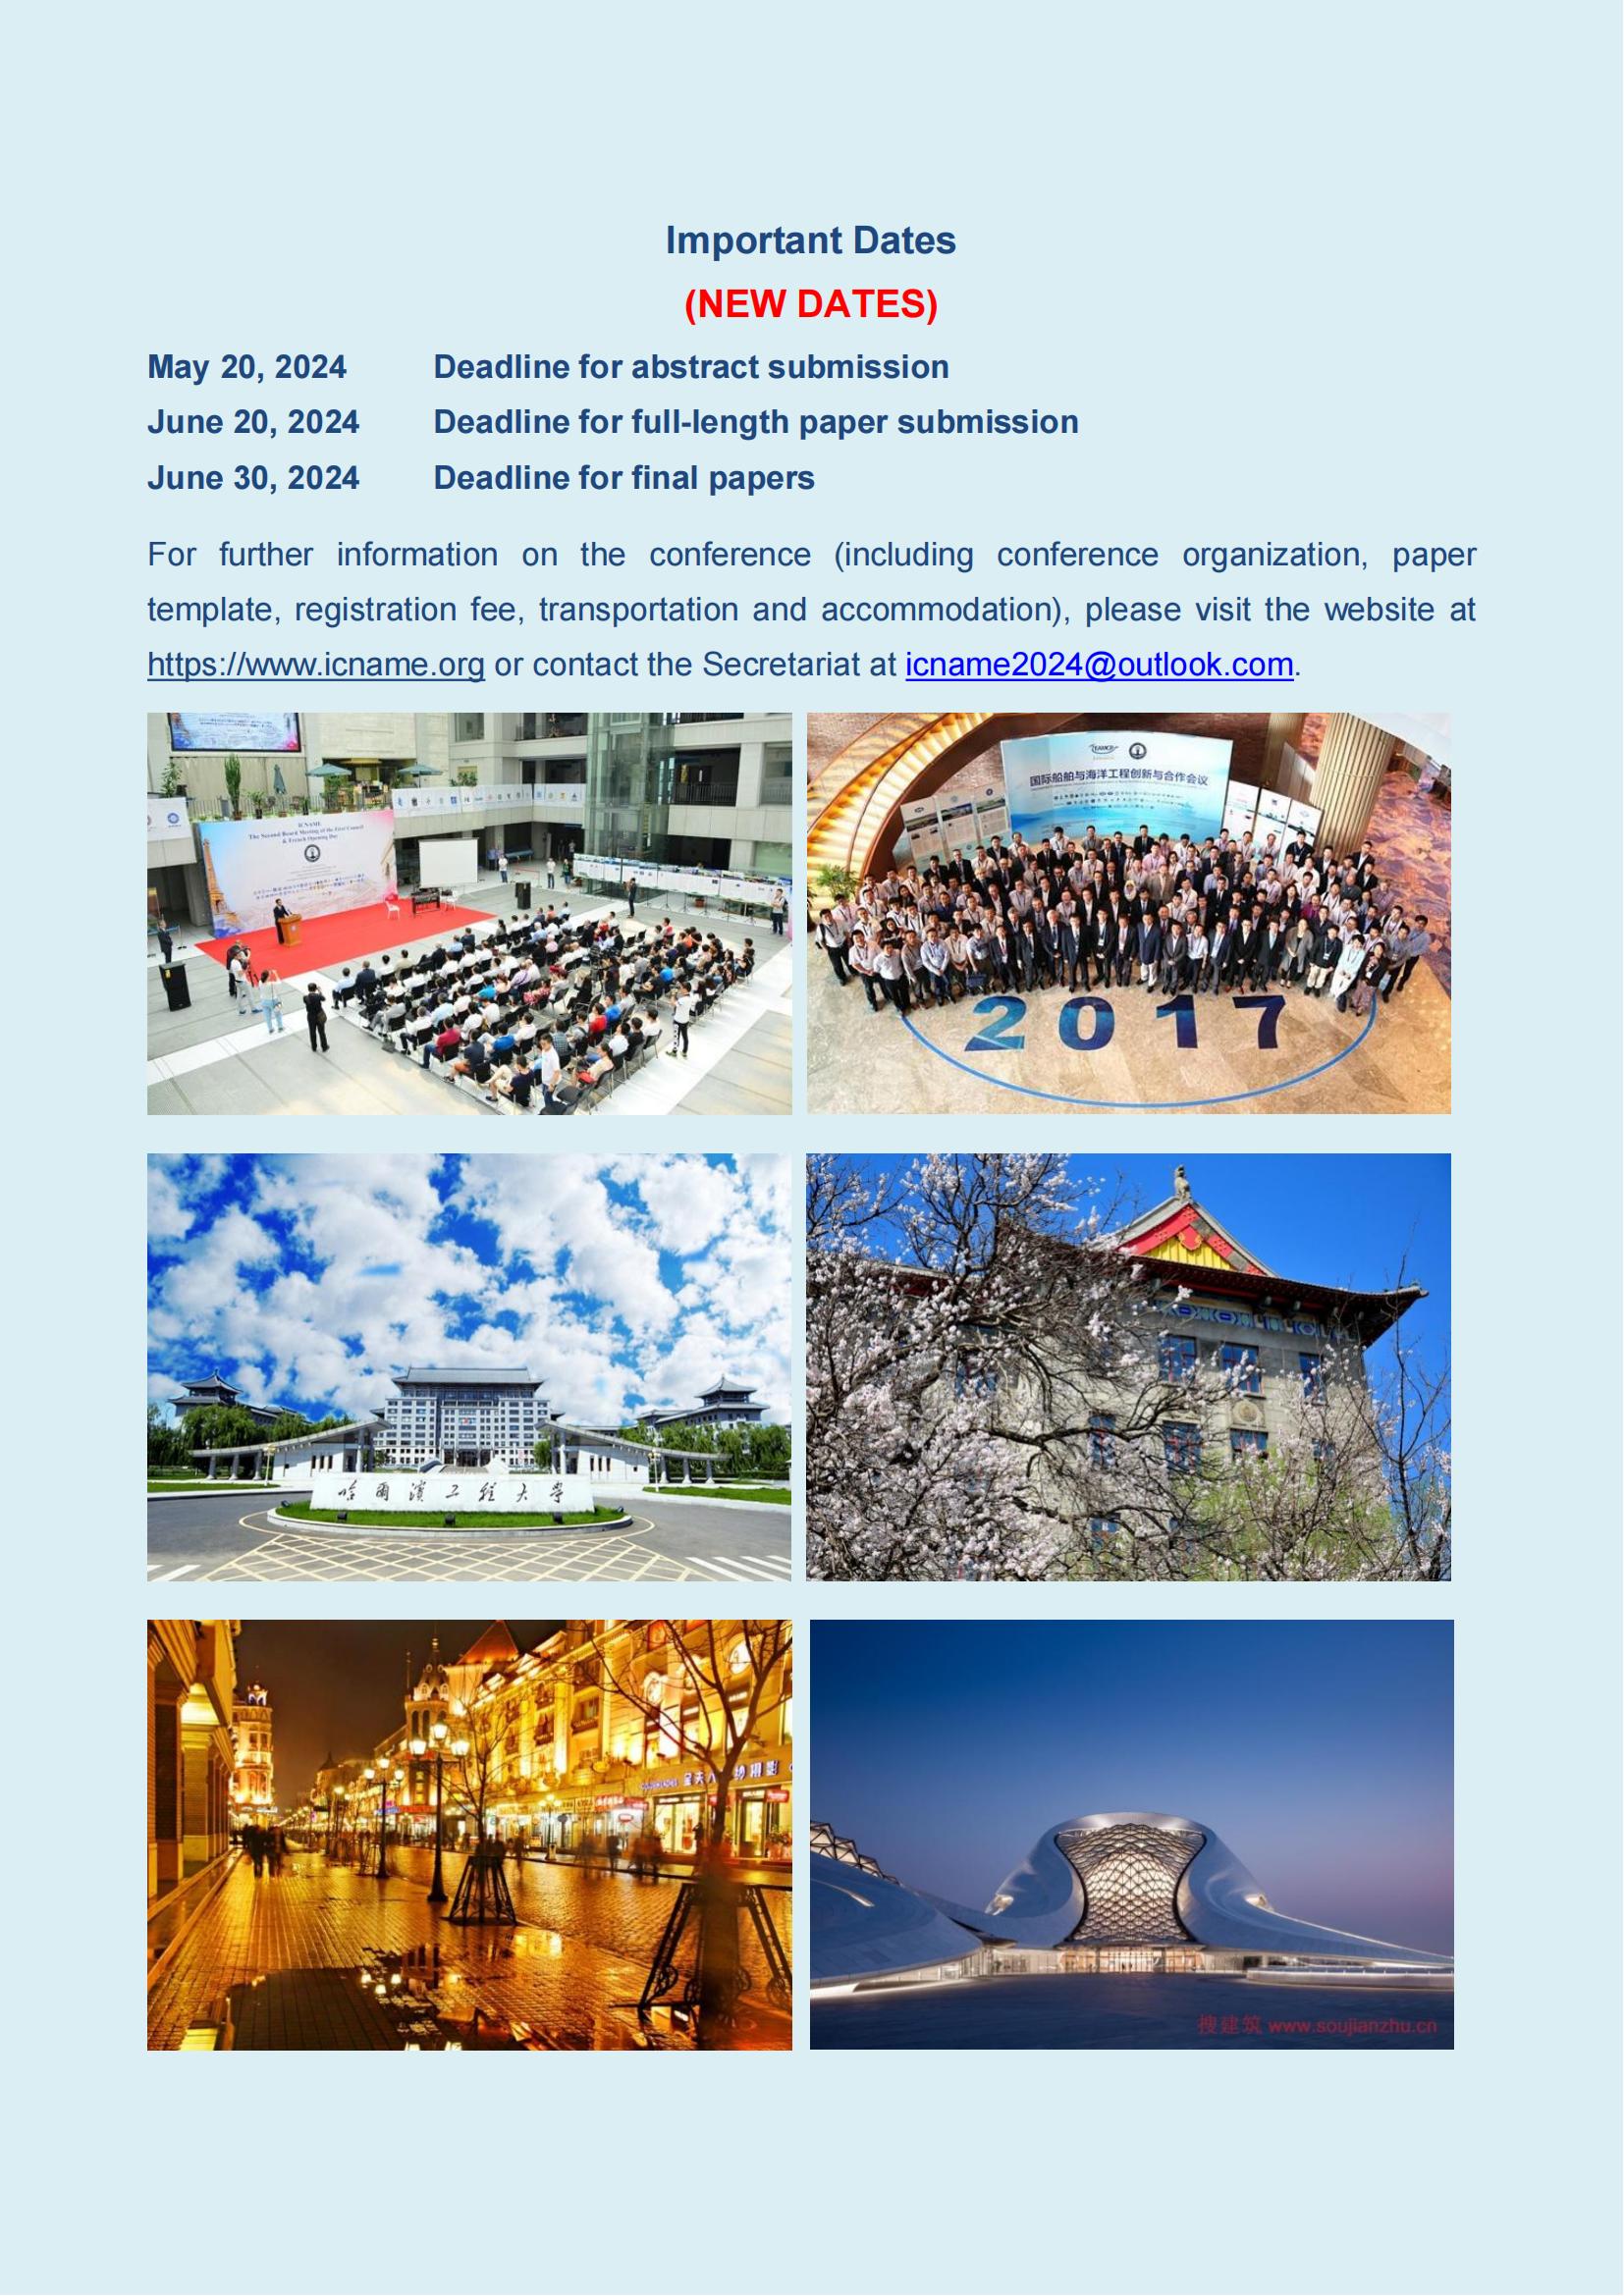 ICNAME2024 2nd Announcement and Call for Papers-Revised-2_05.jpg